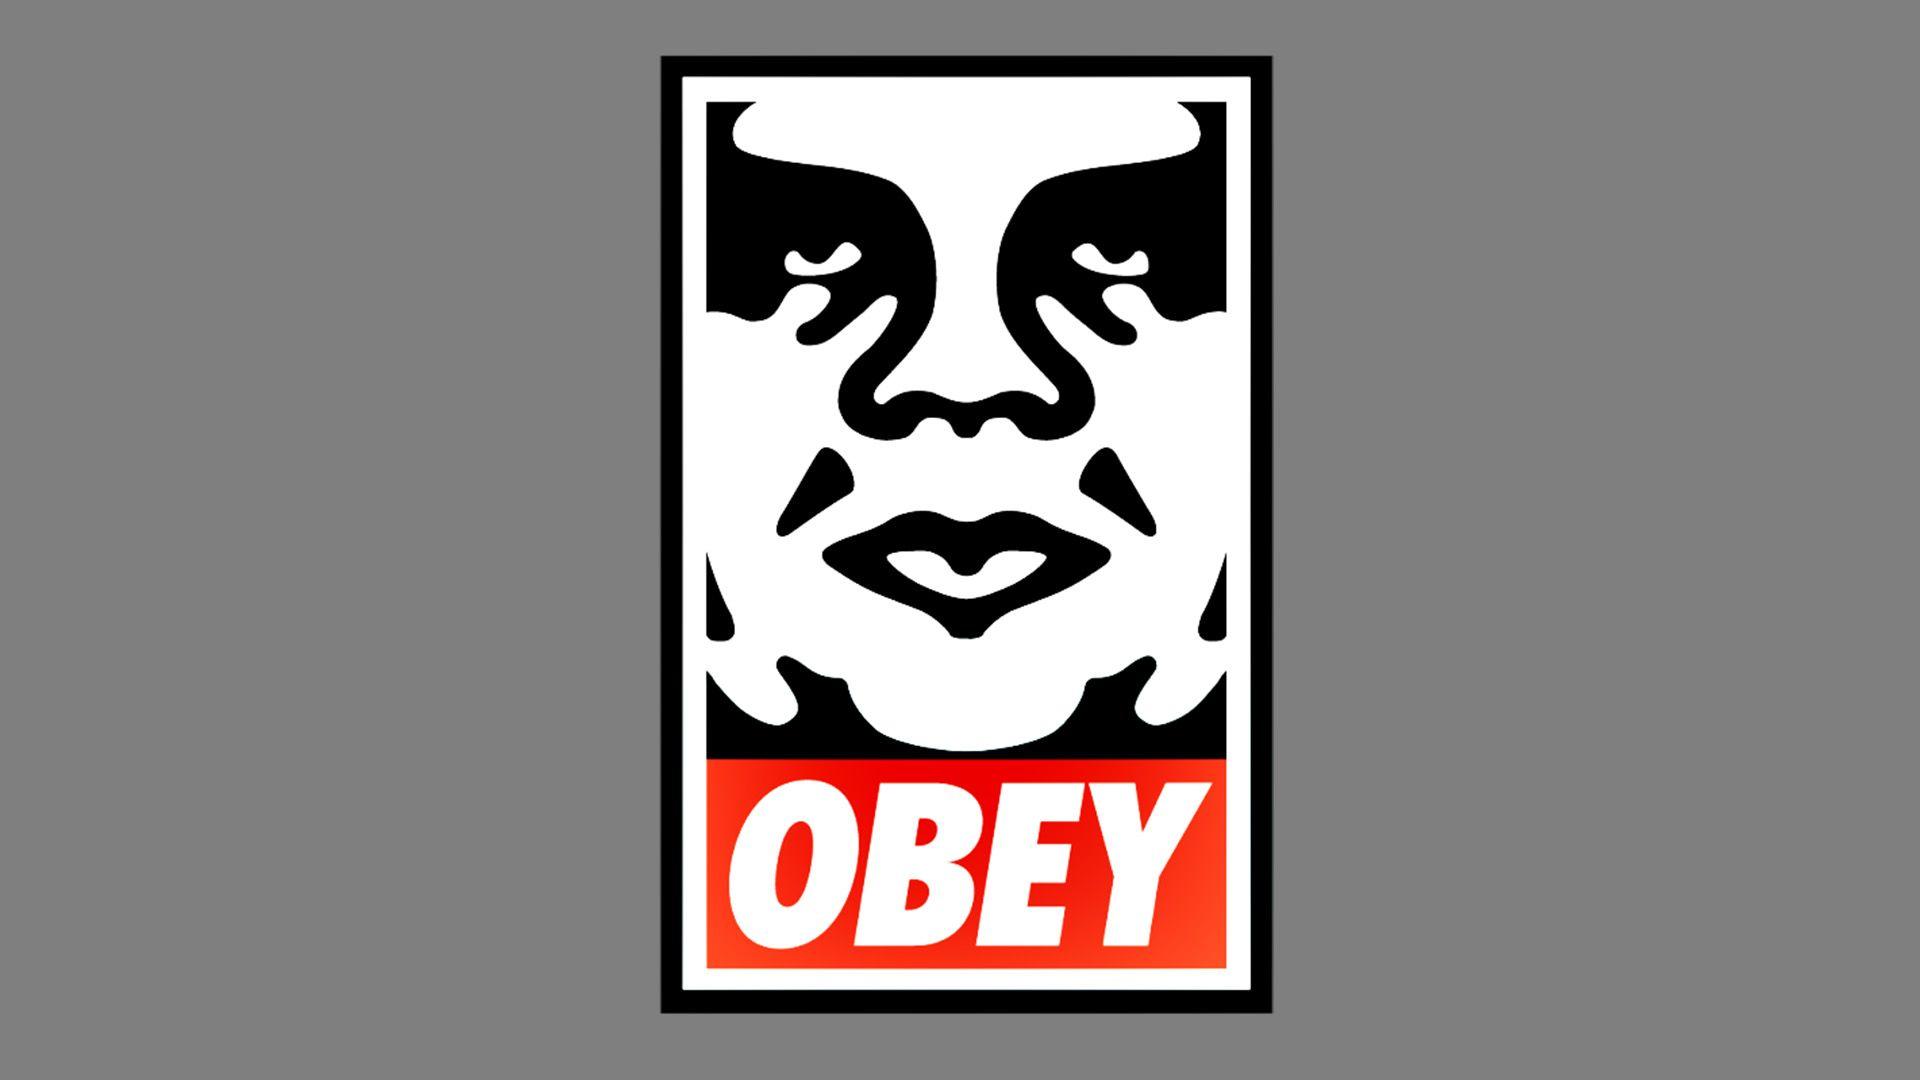 The Obey Logo - Obey Logo, Obey Symbol, Meaning, History and Evolution